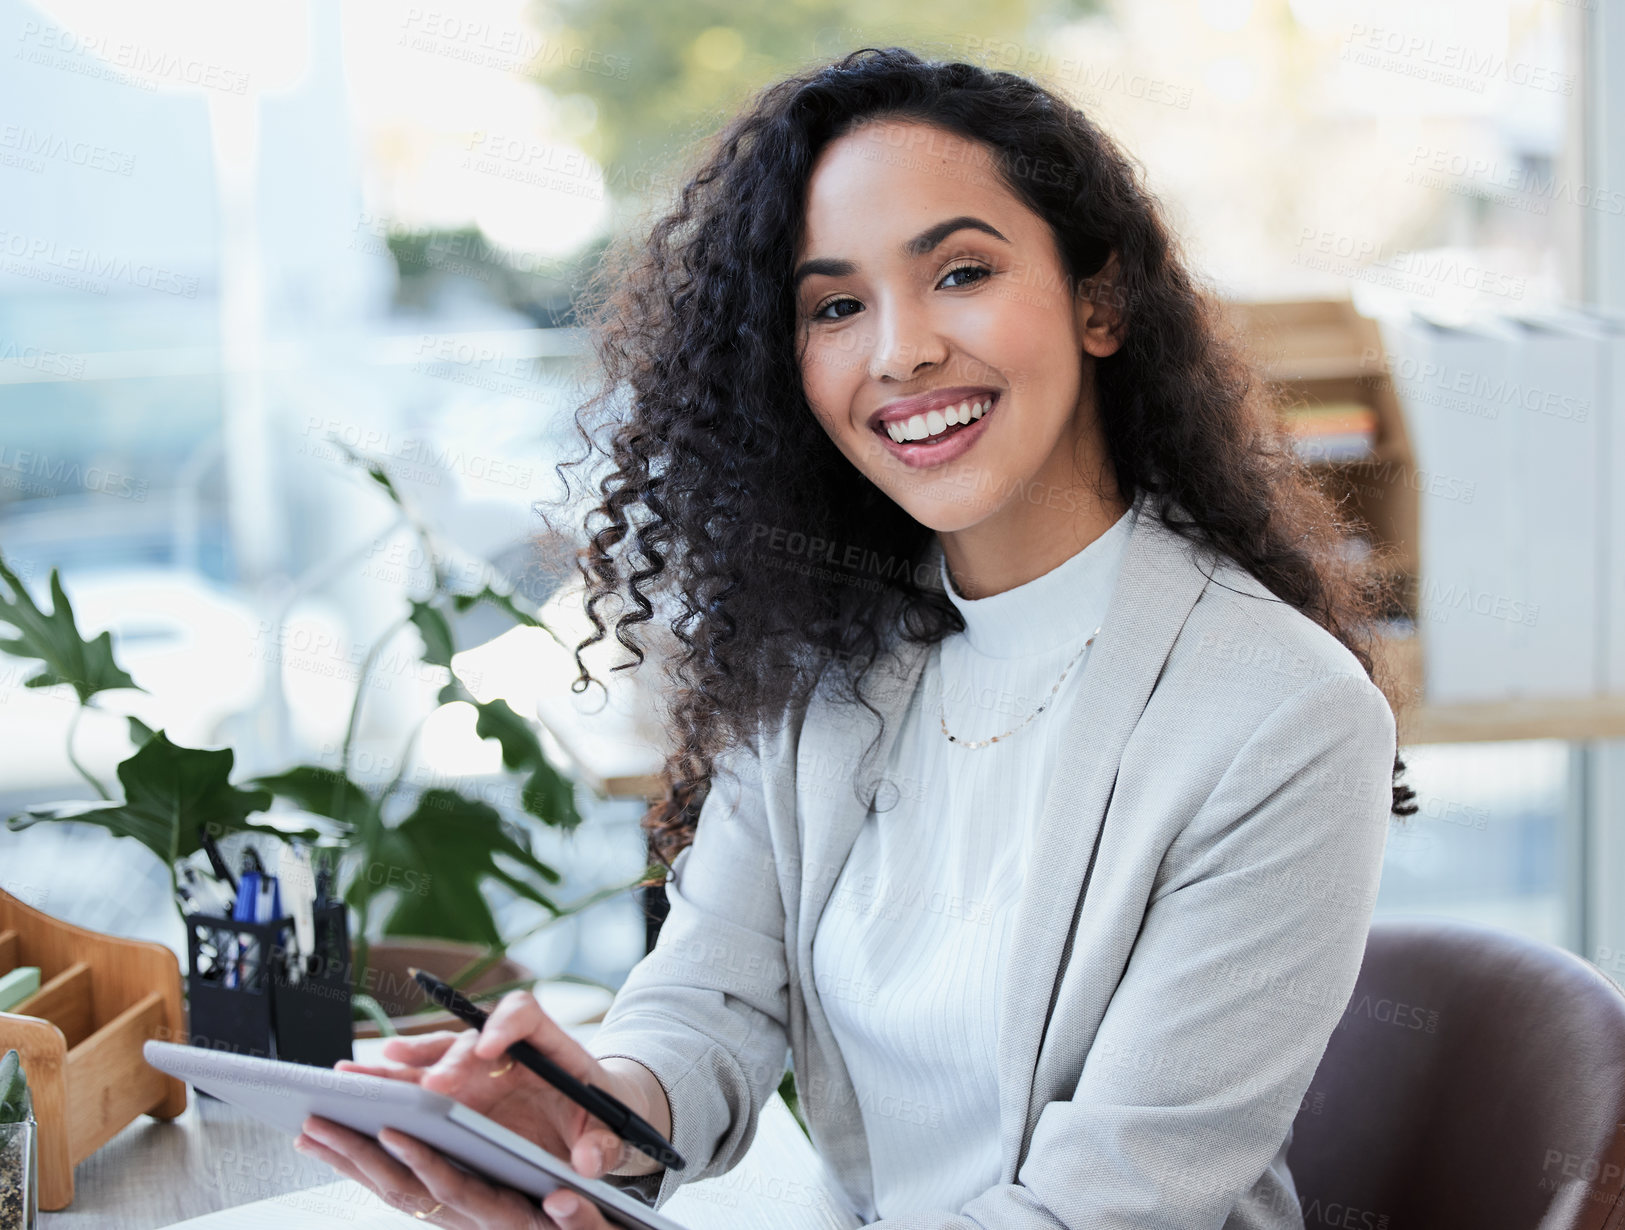 Buy stock photo Shot of a young businesswoman using her digital tablet